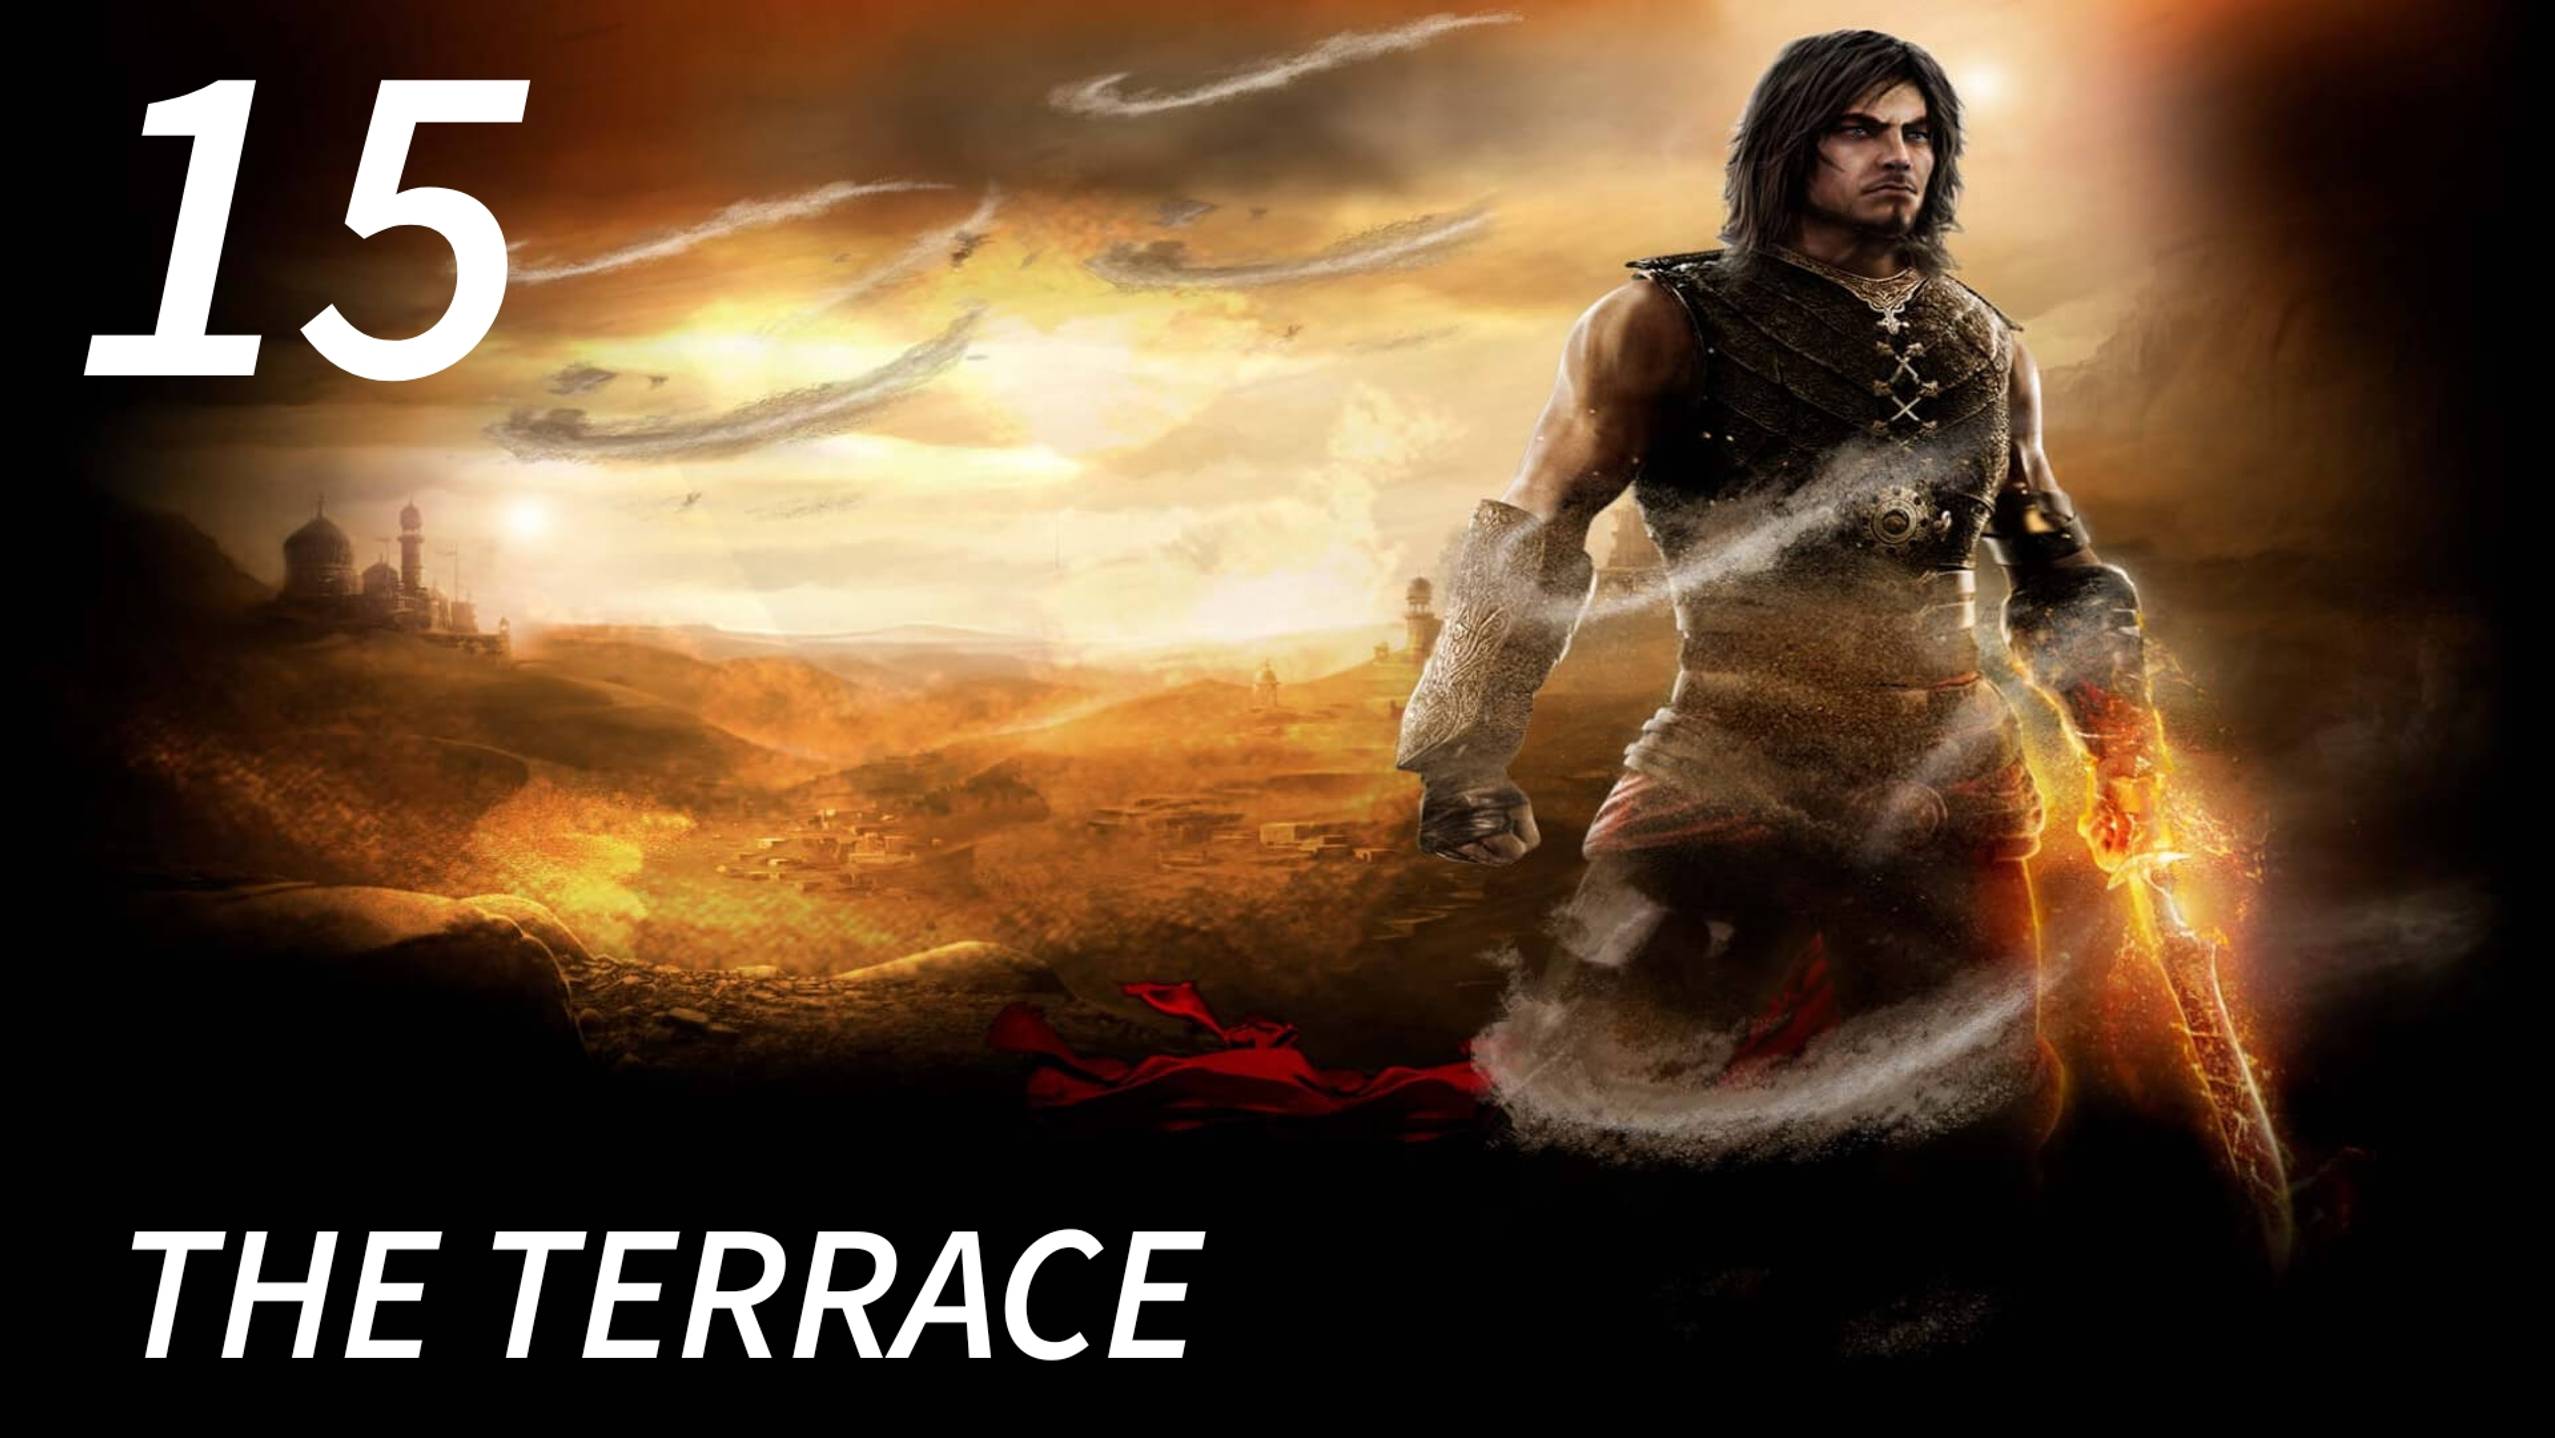 Prince of Persia: The Forgotten Sands / The Terrace